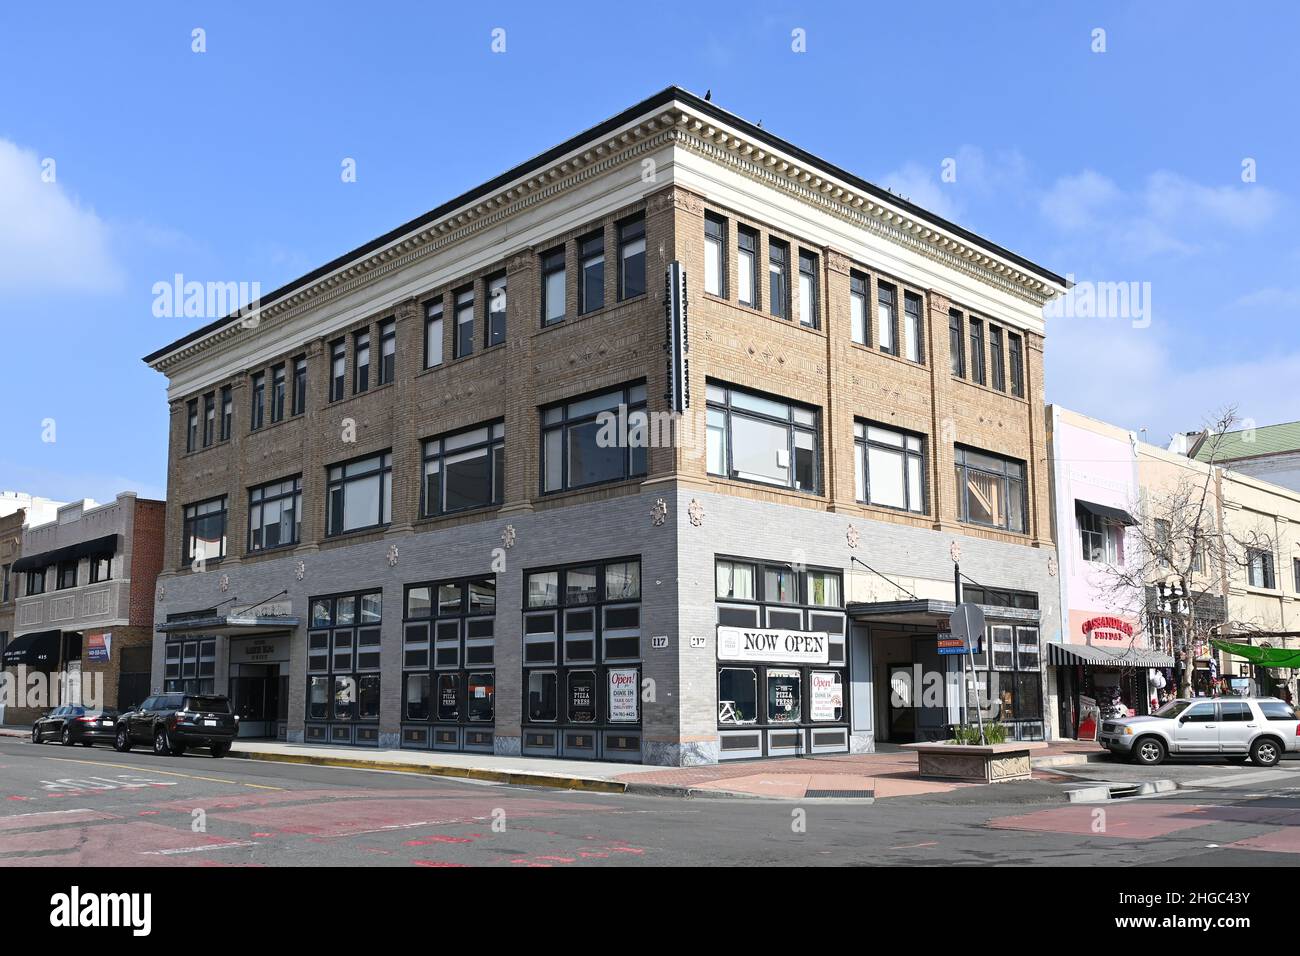 SANTA ANA, CALIFORNIA - 19 JAN 2022: The Rankin Building formerly a department store, is listed on the National Register of Historic Places. Stock Photo